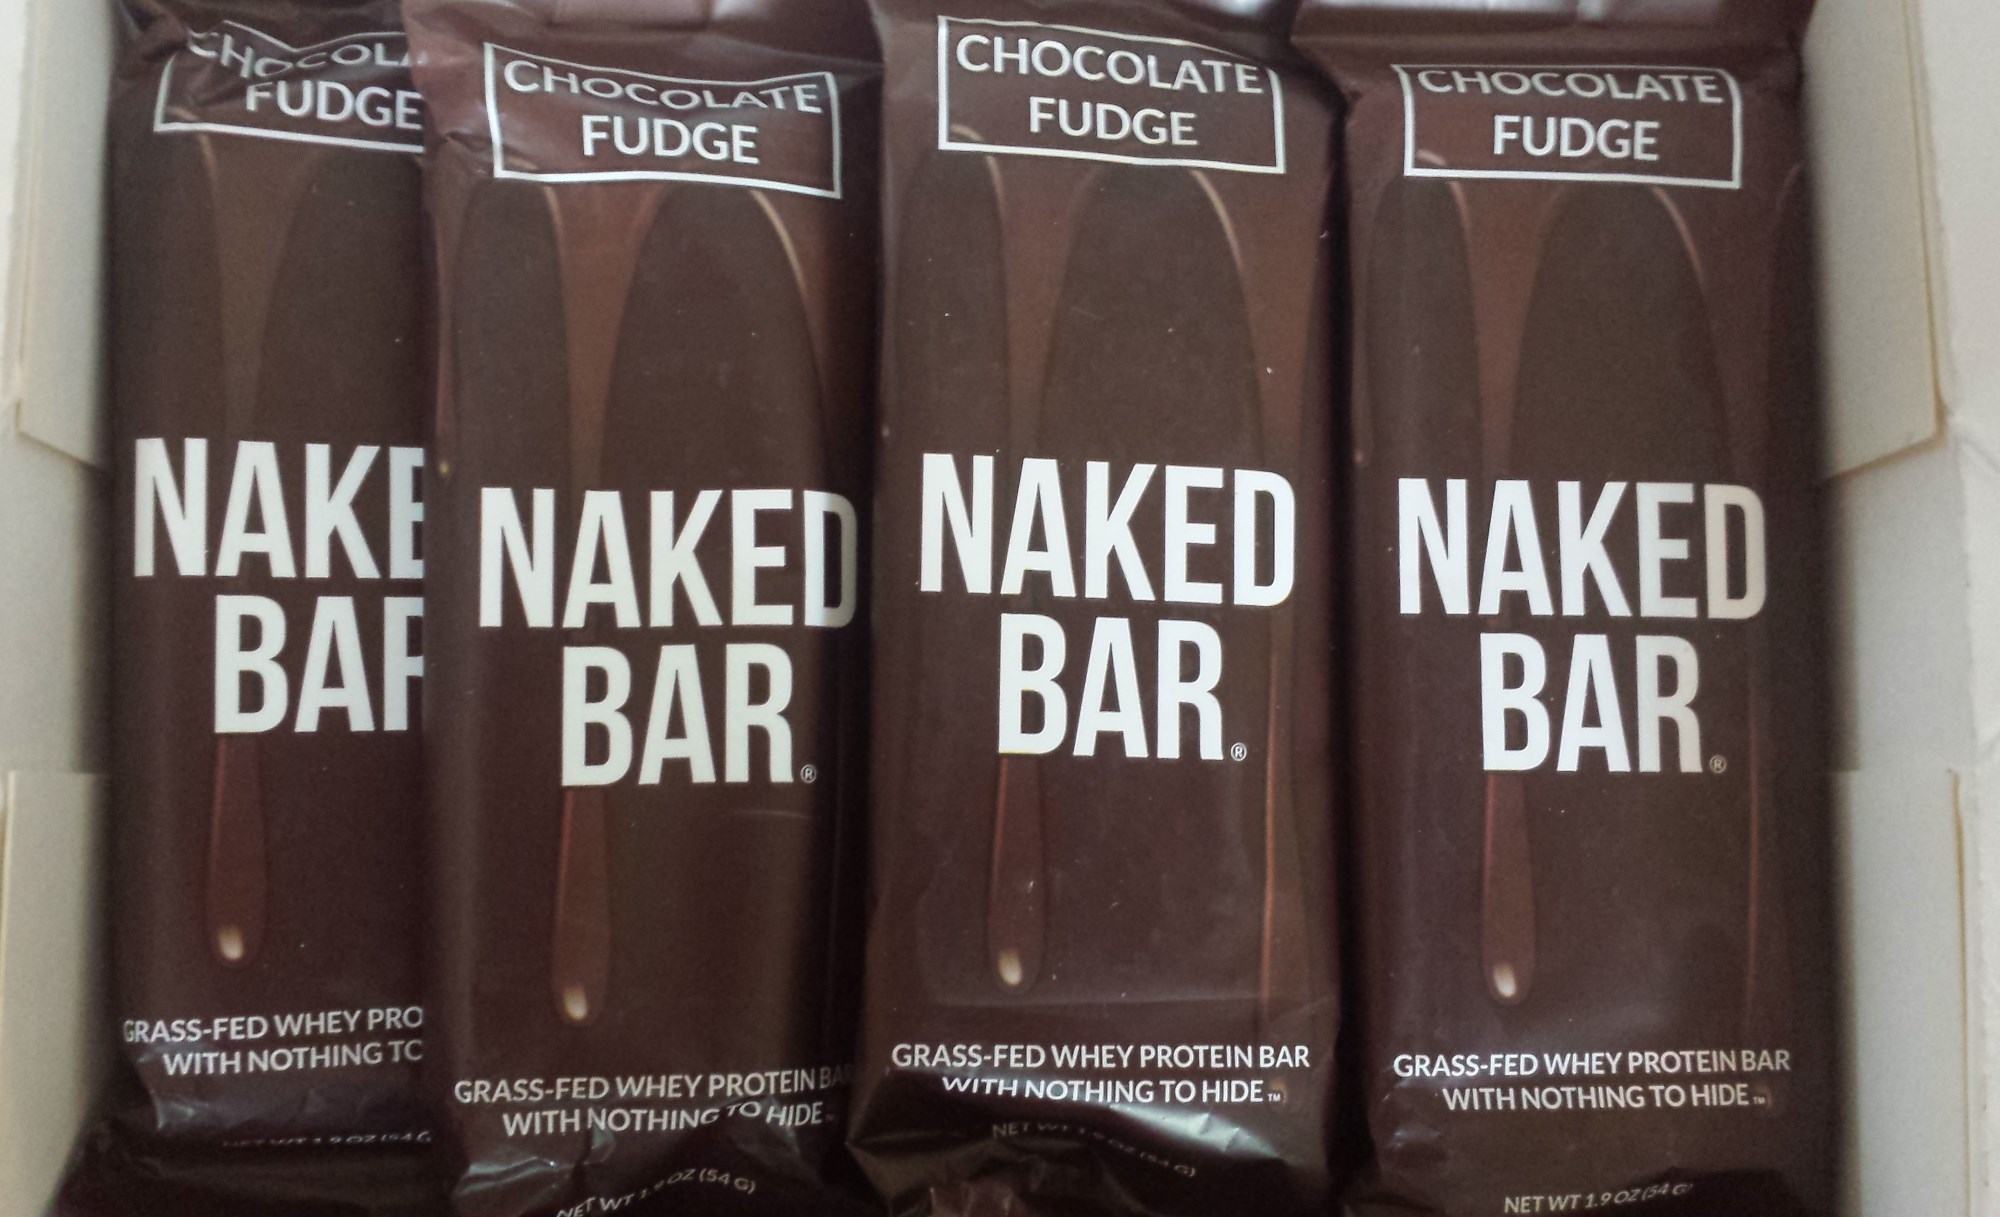 Naked Bar - all natural chocolate fudge protein bar from Naked Nutrition